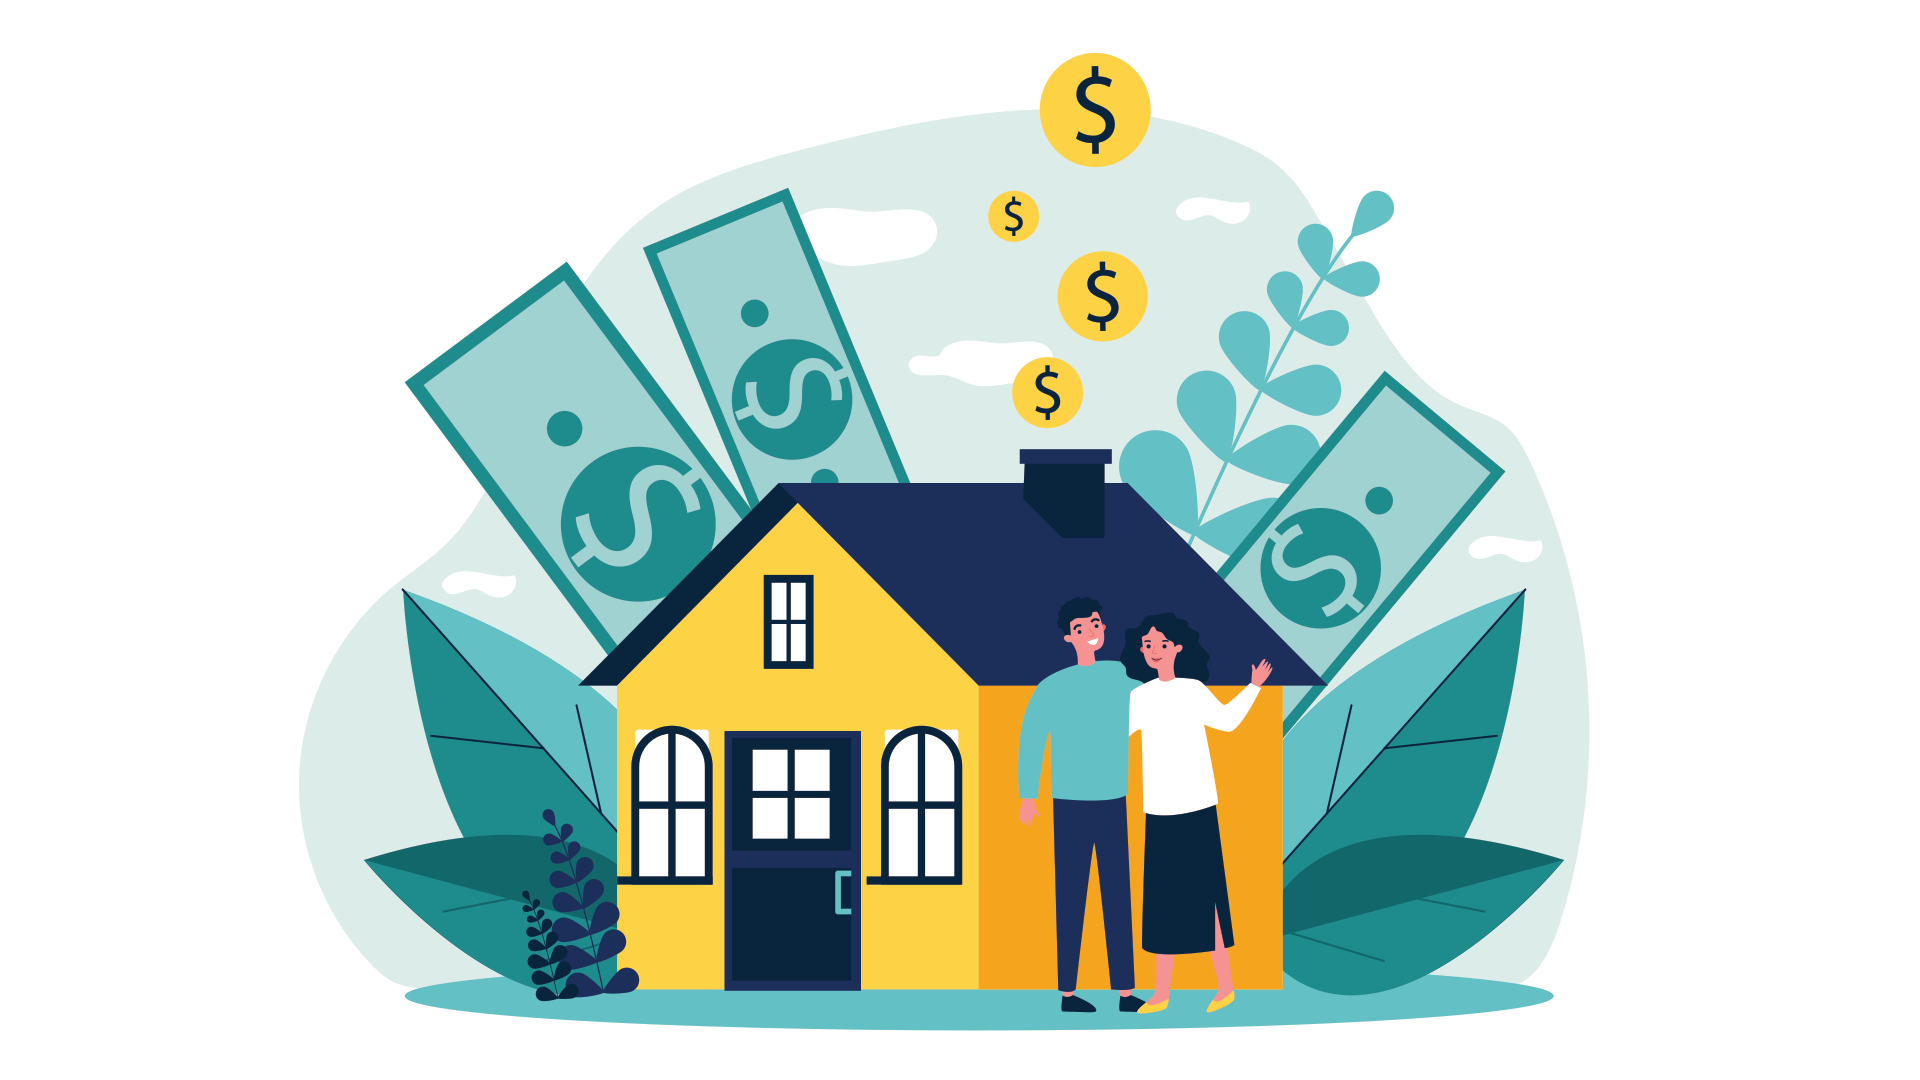 Home Equity Loans vs. HELOC: What's the difference?